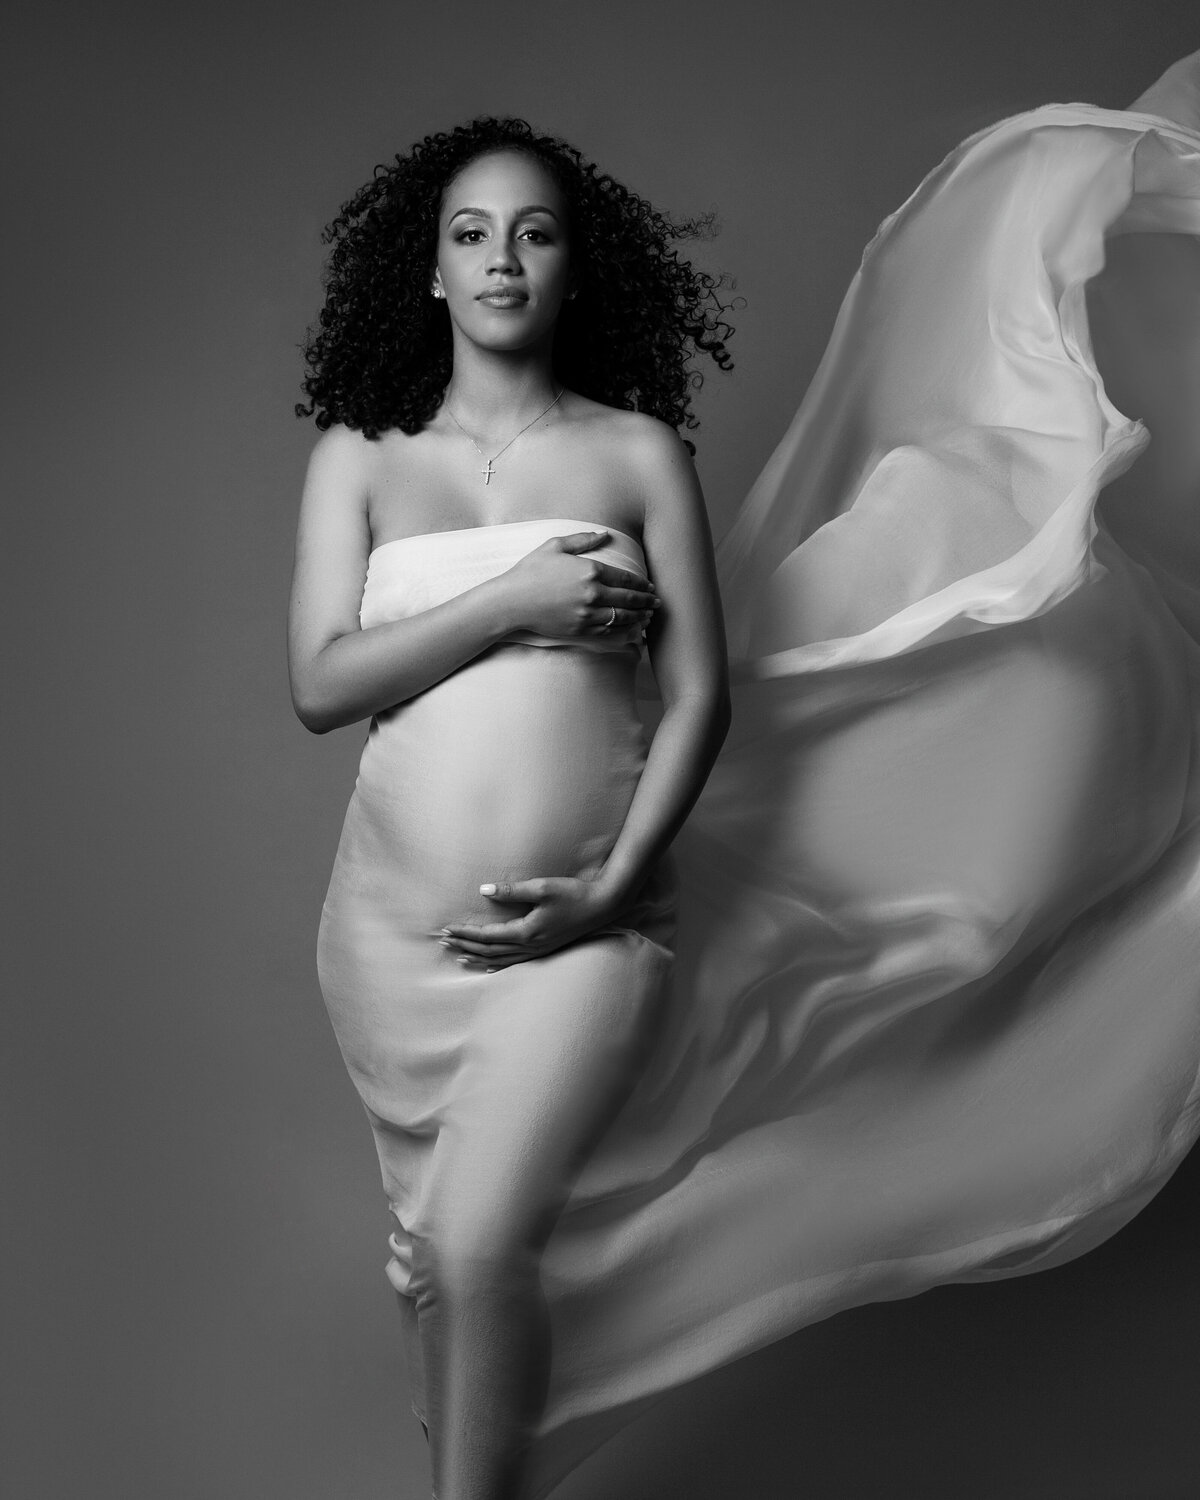 Timeless black and white artistic maternity photography